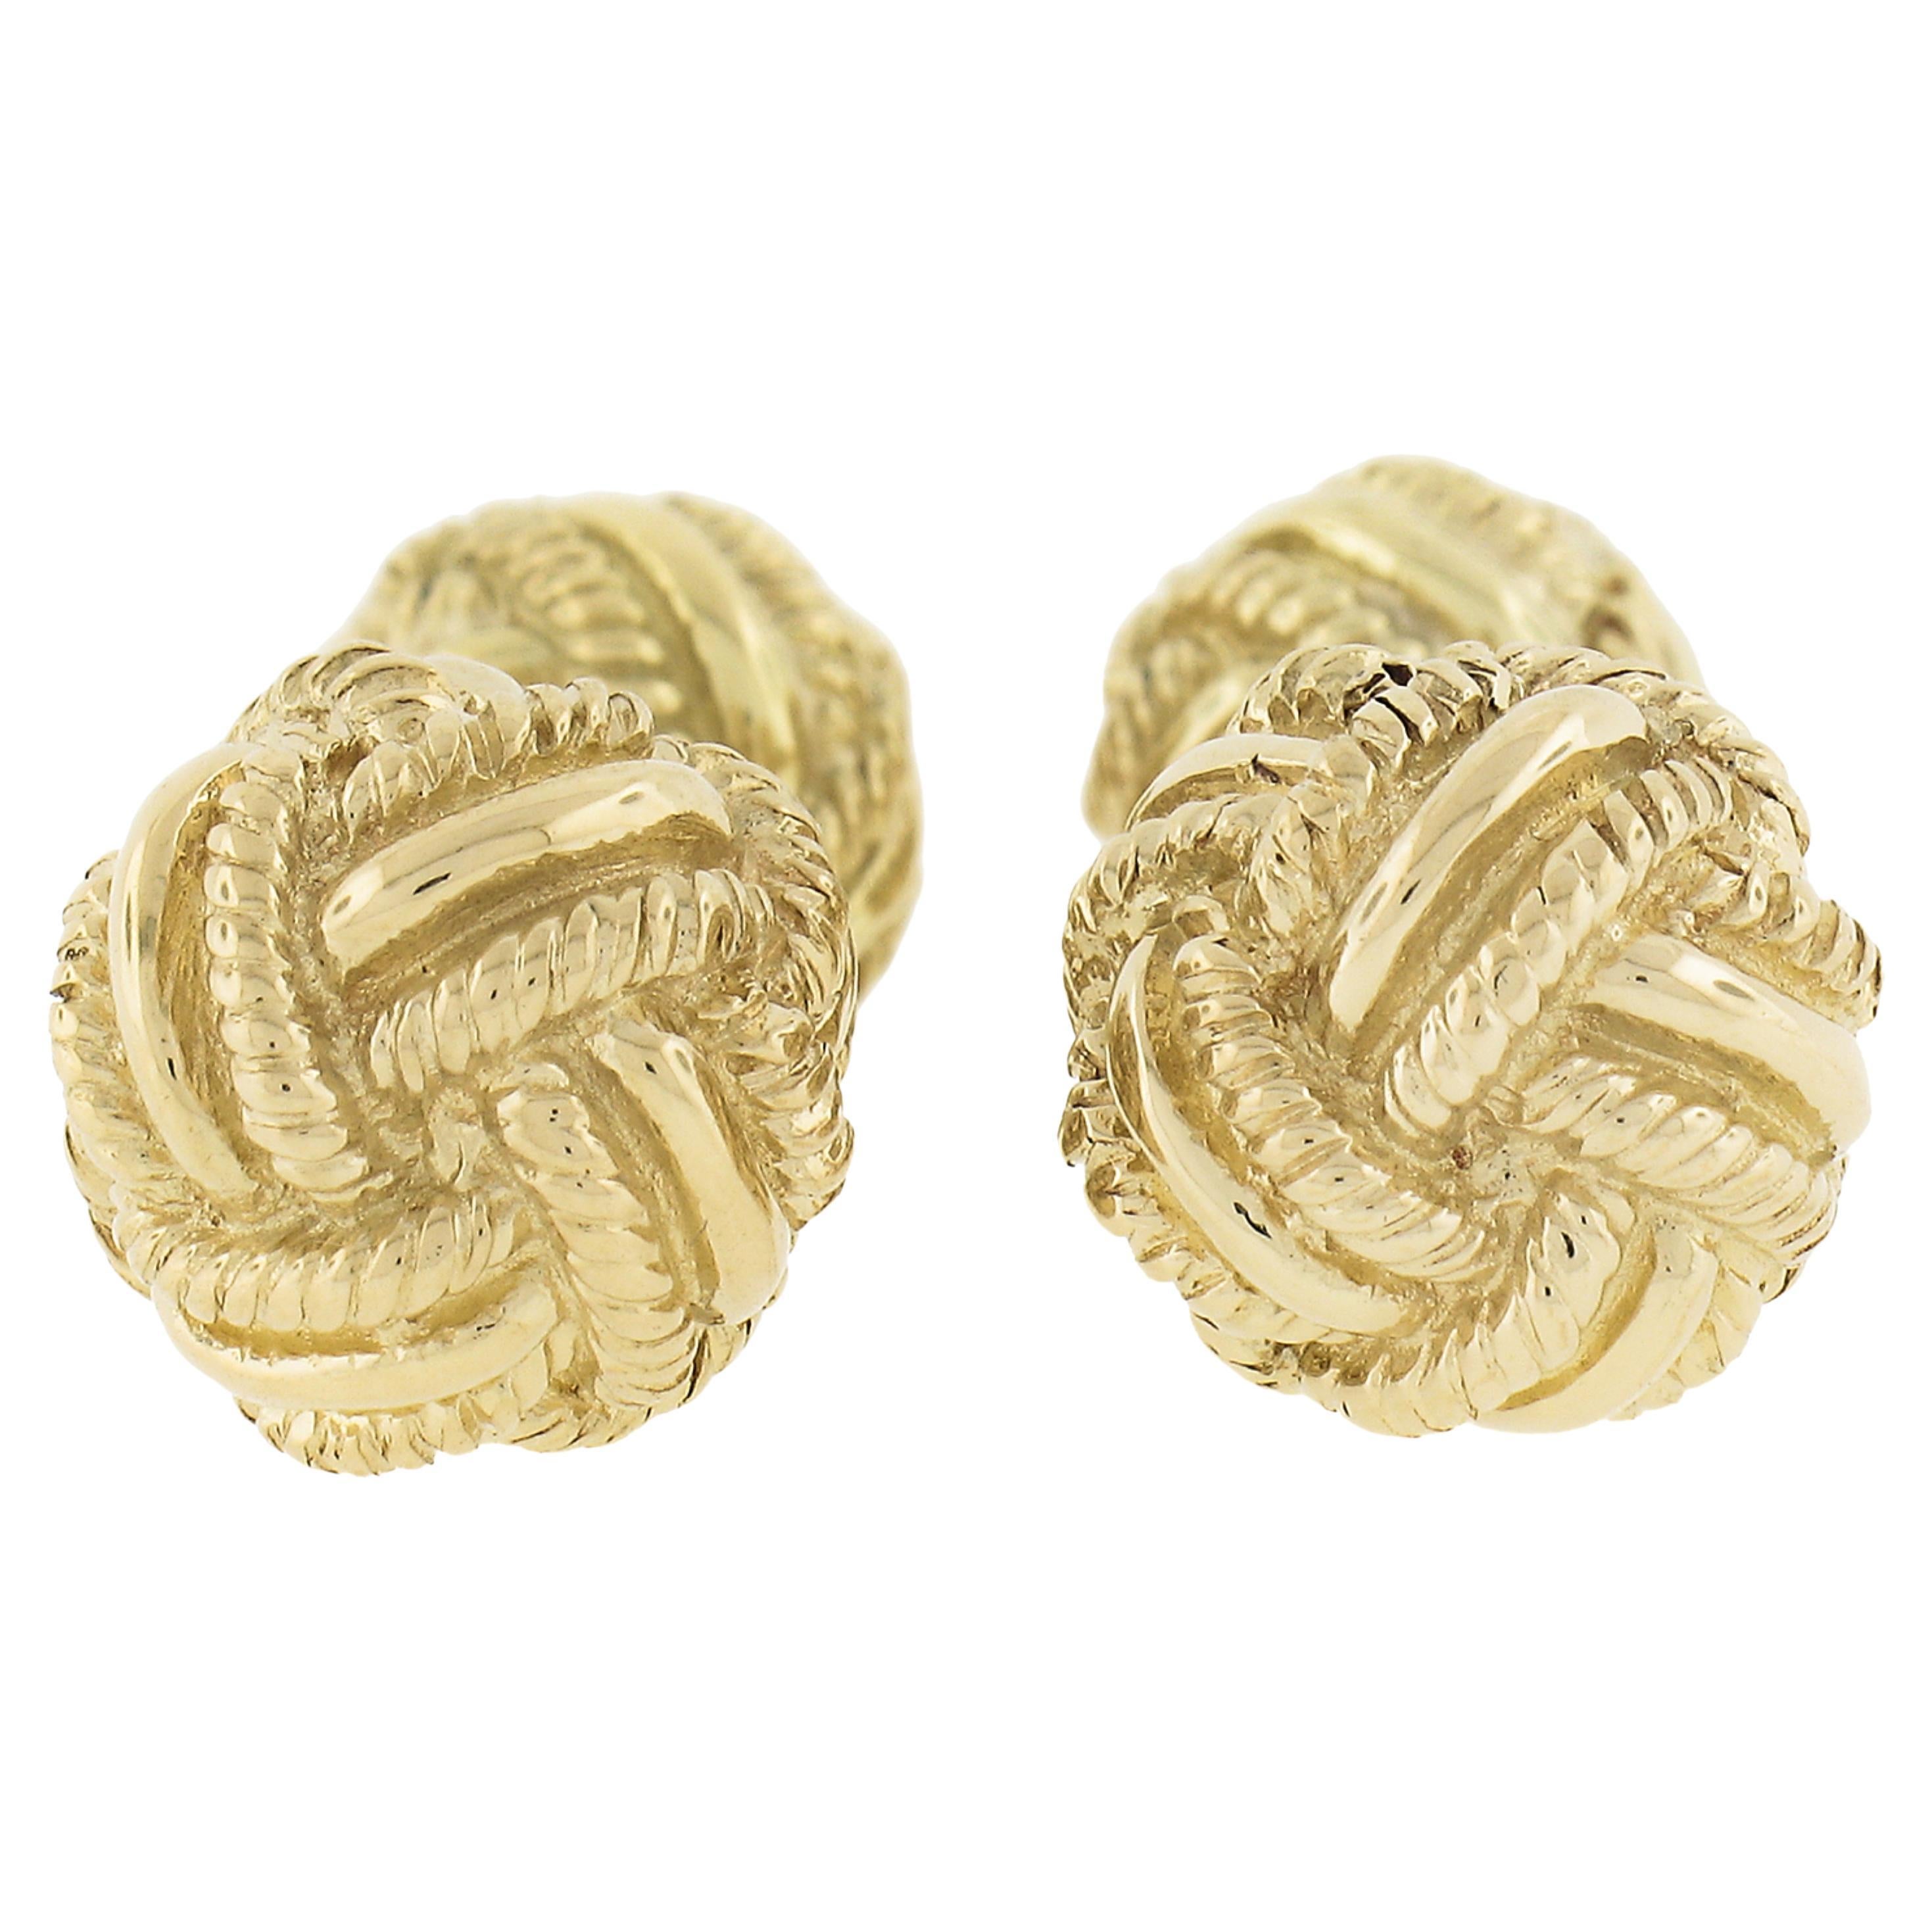 Tiffany & Co. Schlumberger Men's Solid 18k Yellow Gold Woven Knot Cufflinks For Sale